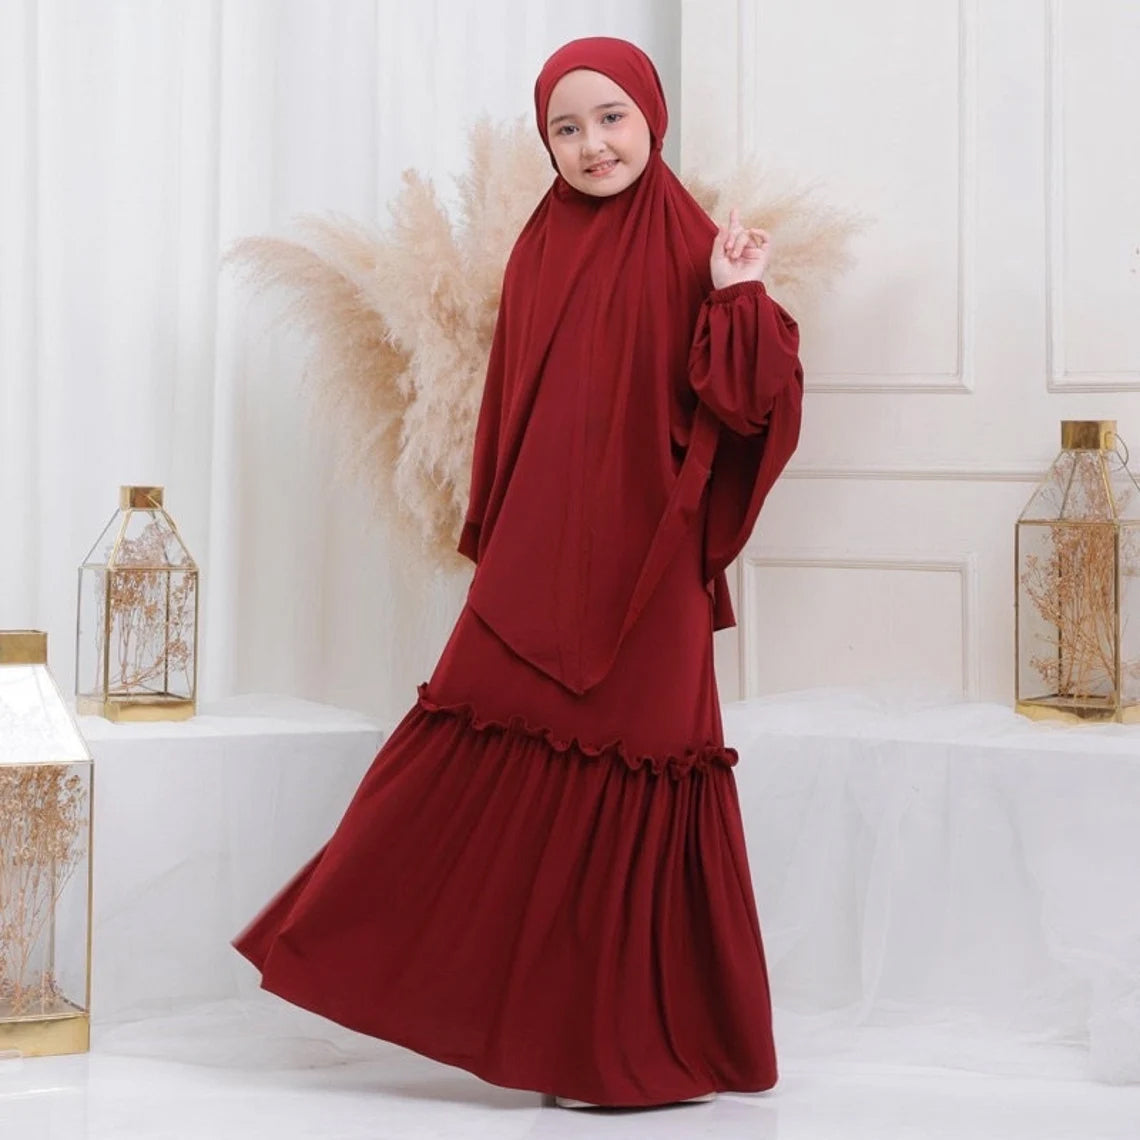 Girls Maroon Duster Cardigan Abaya - Modest Styling for Tweens and Teens!